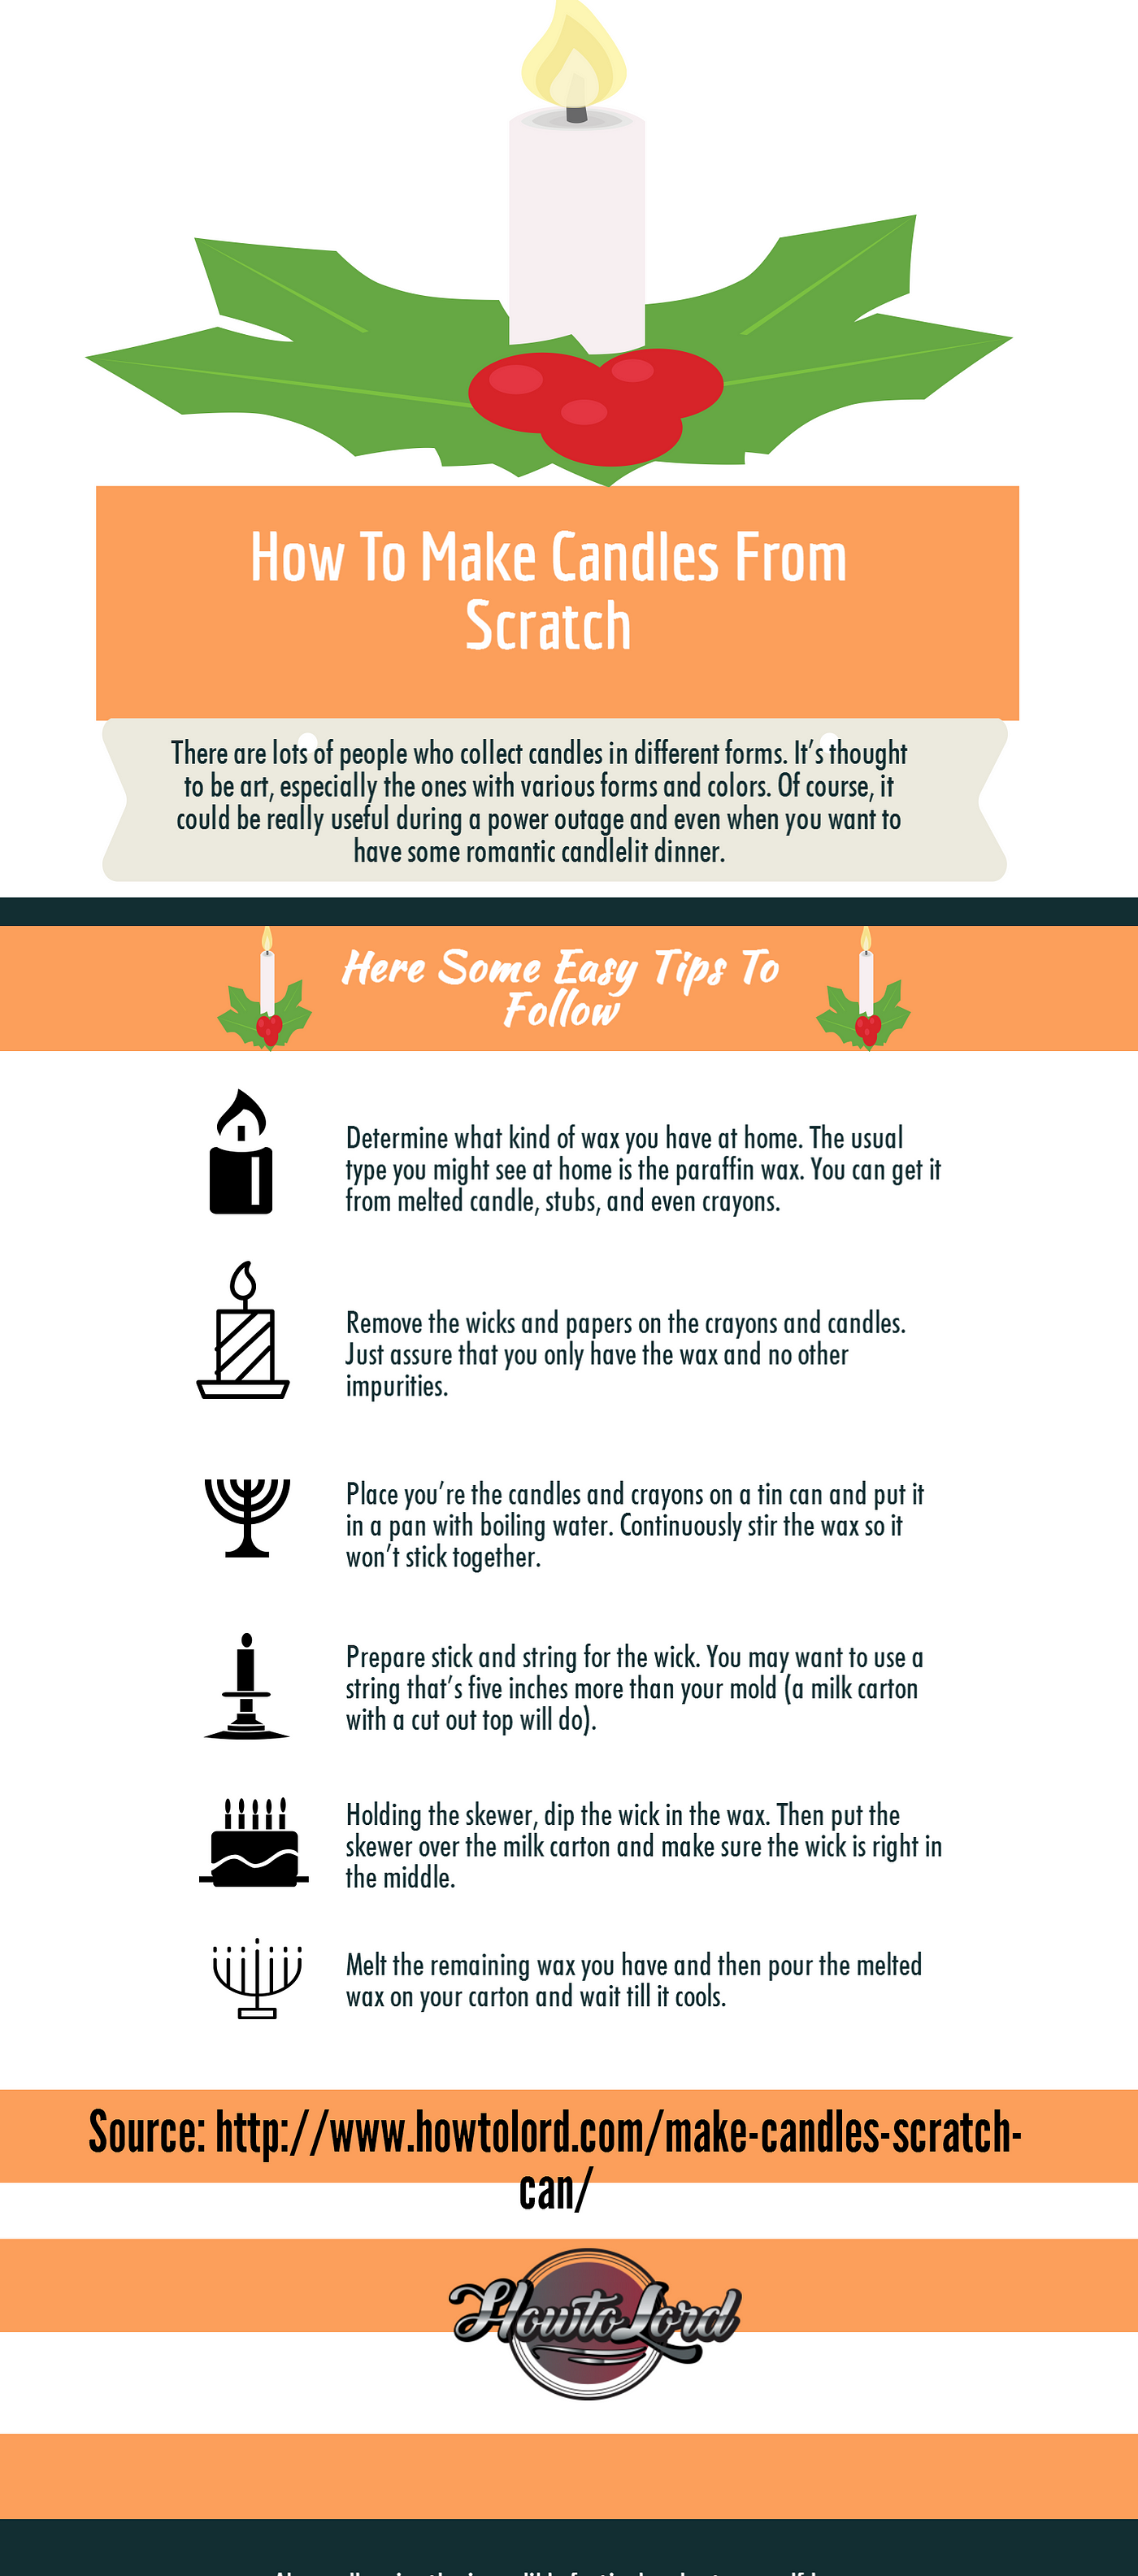 Six Easy Steps on How To Make Candles From Scratch | by HOW TO LORD | Medium